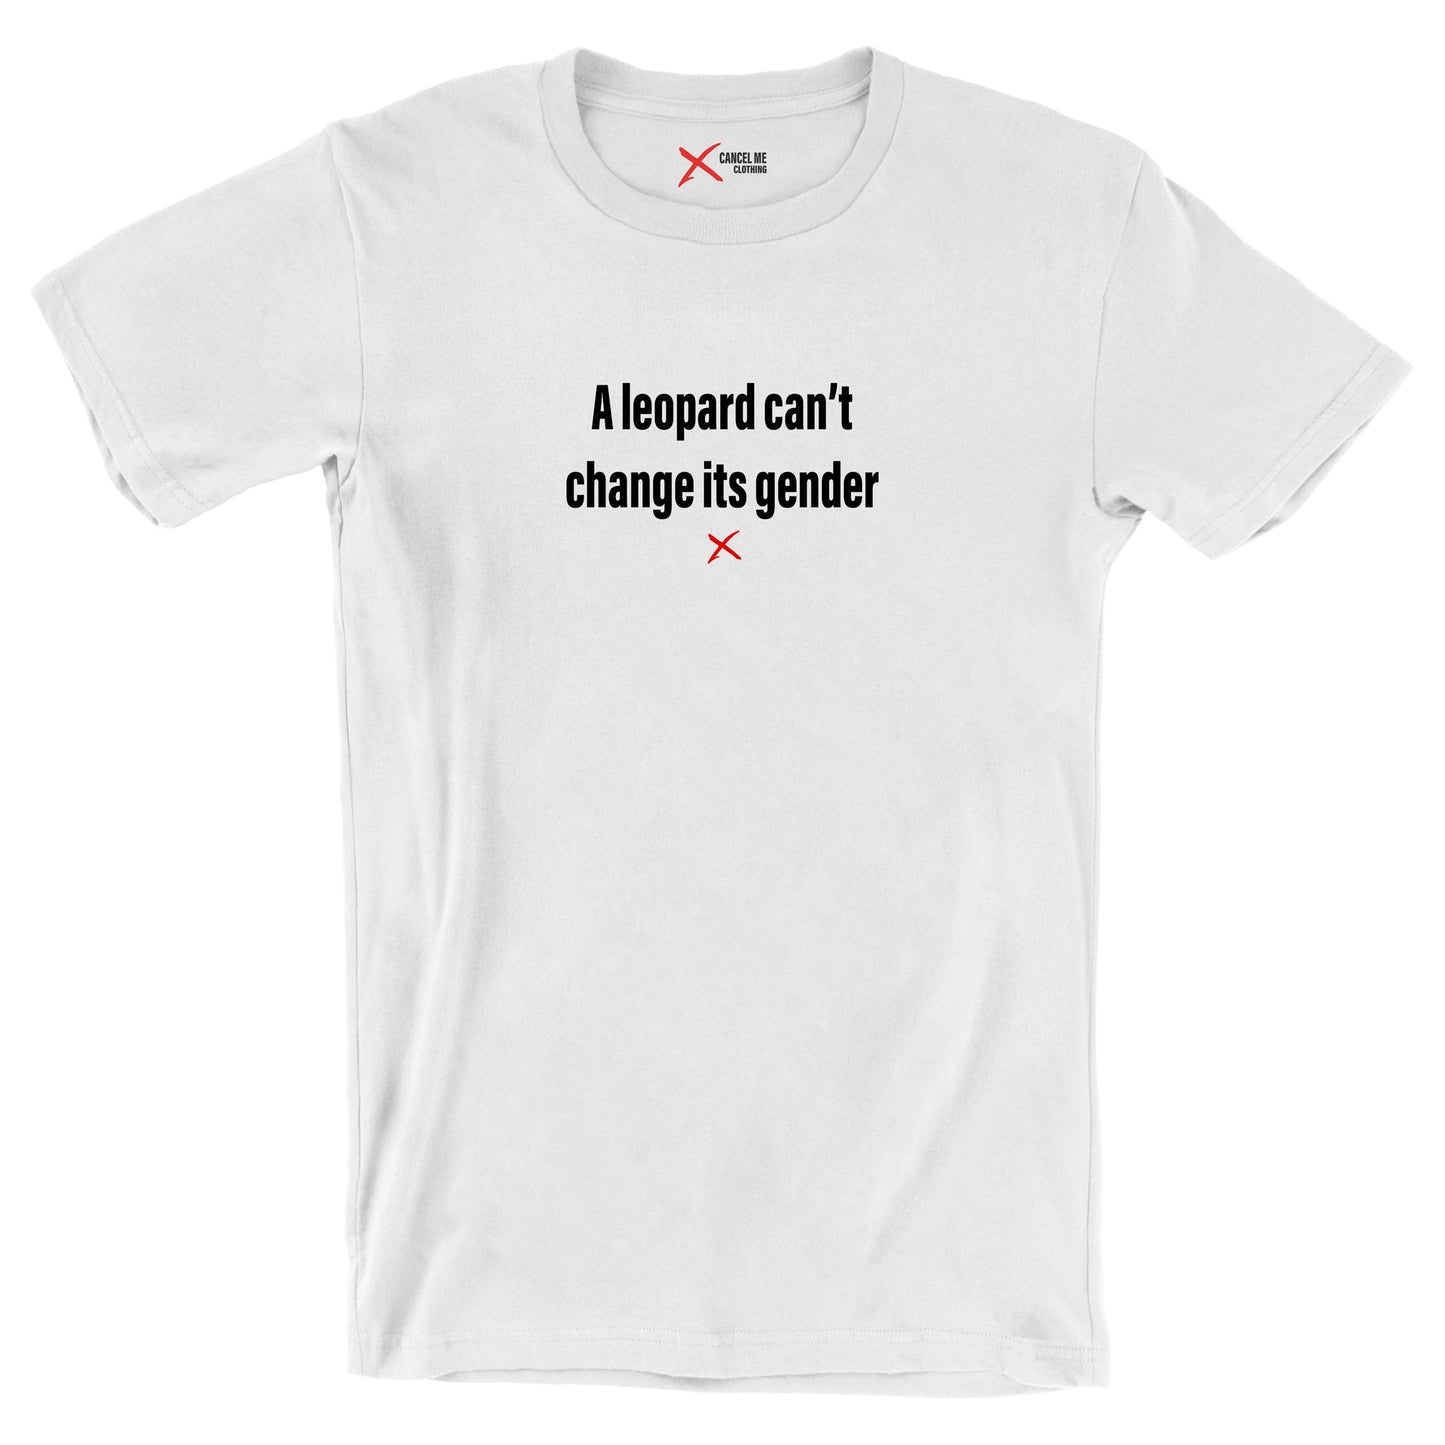 A leopard can't change its gender - Shirt